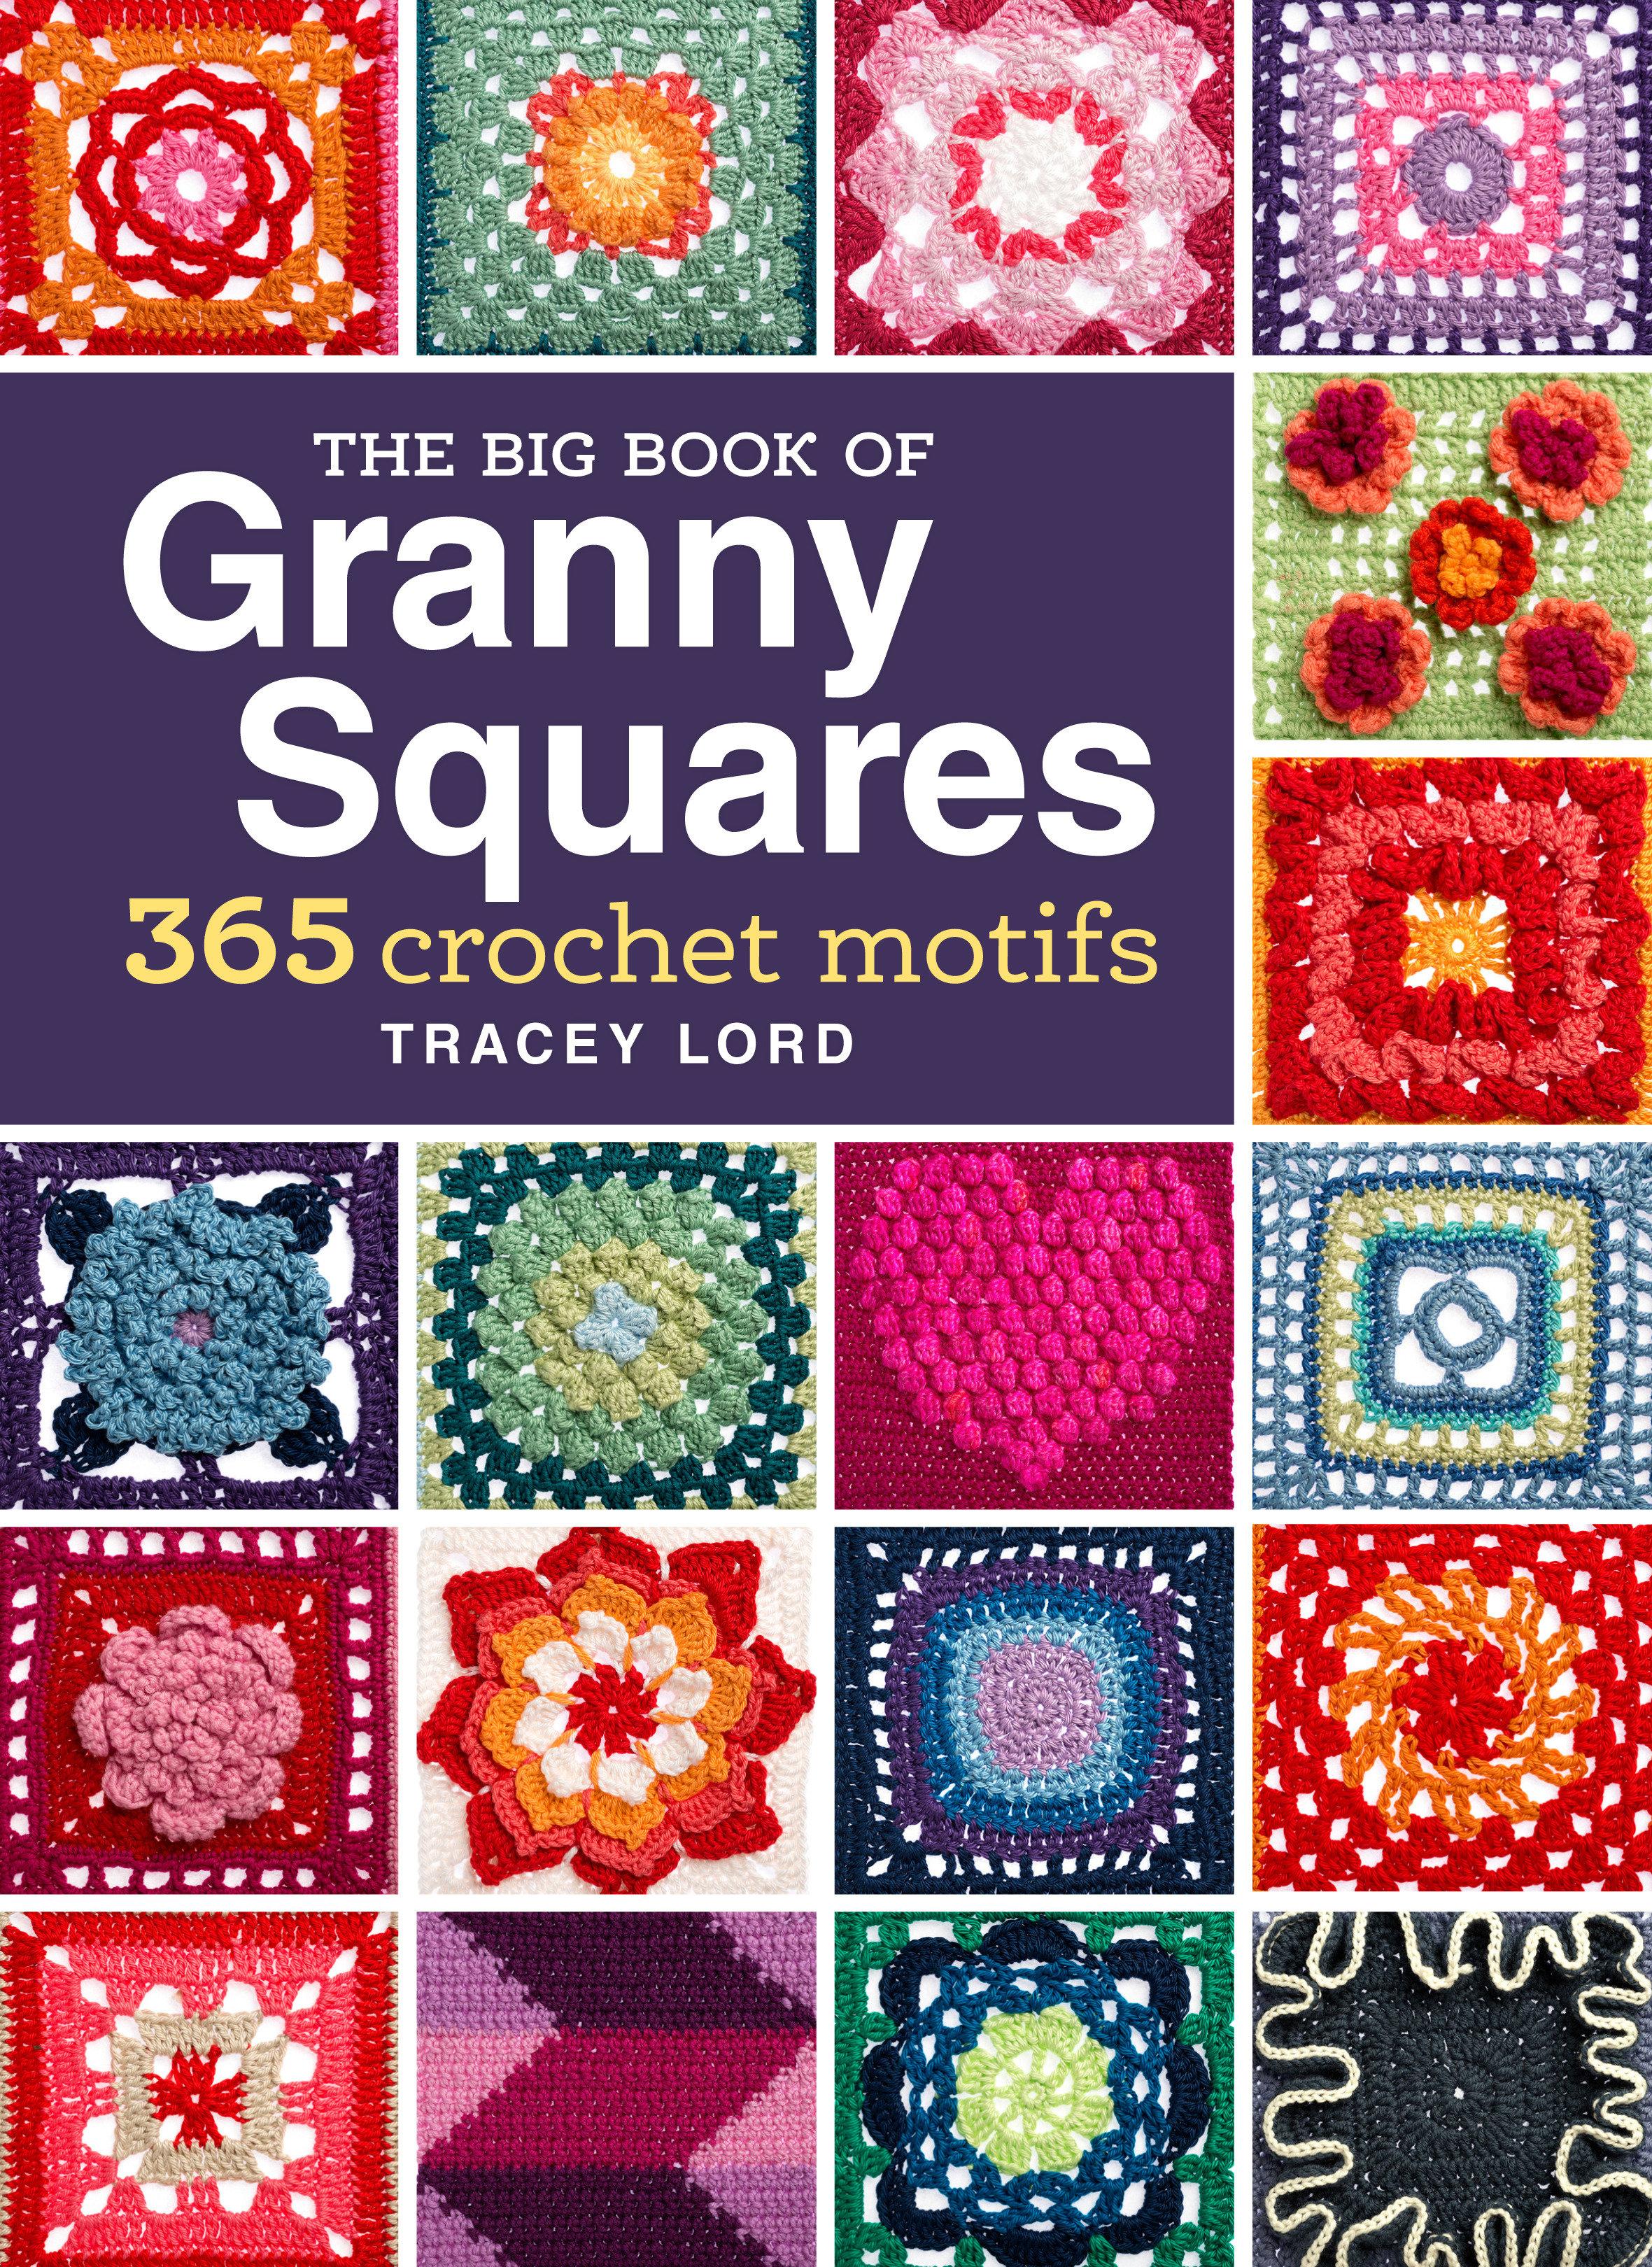 The Big Book of Granny Squares by: Tracey Lord - 9781620337134